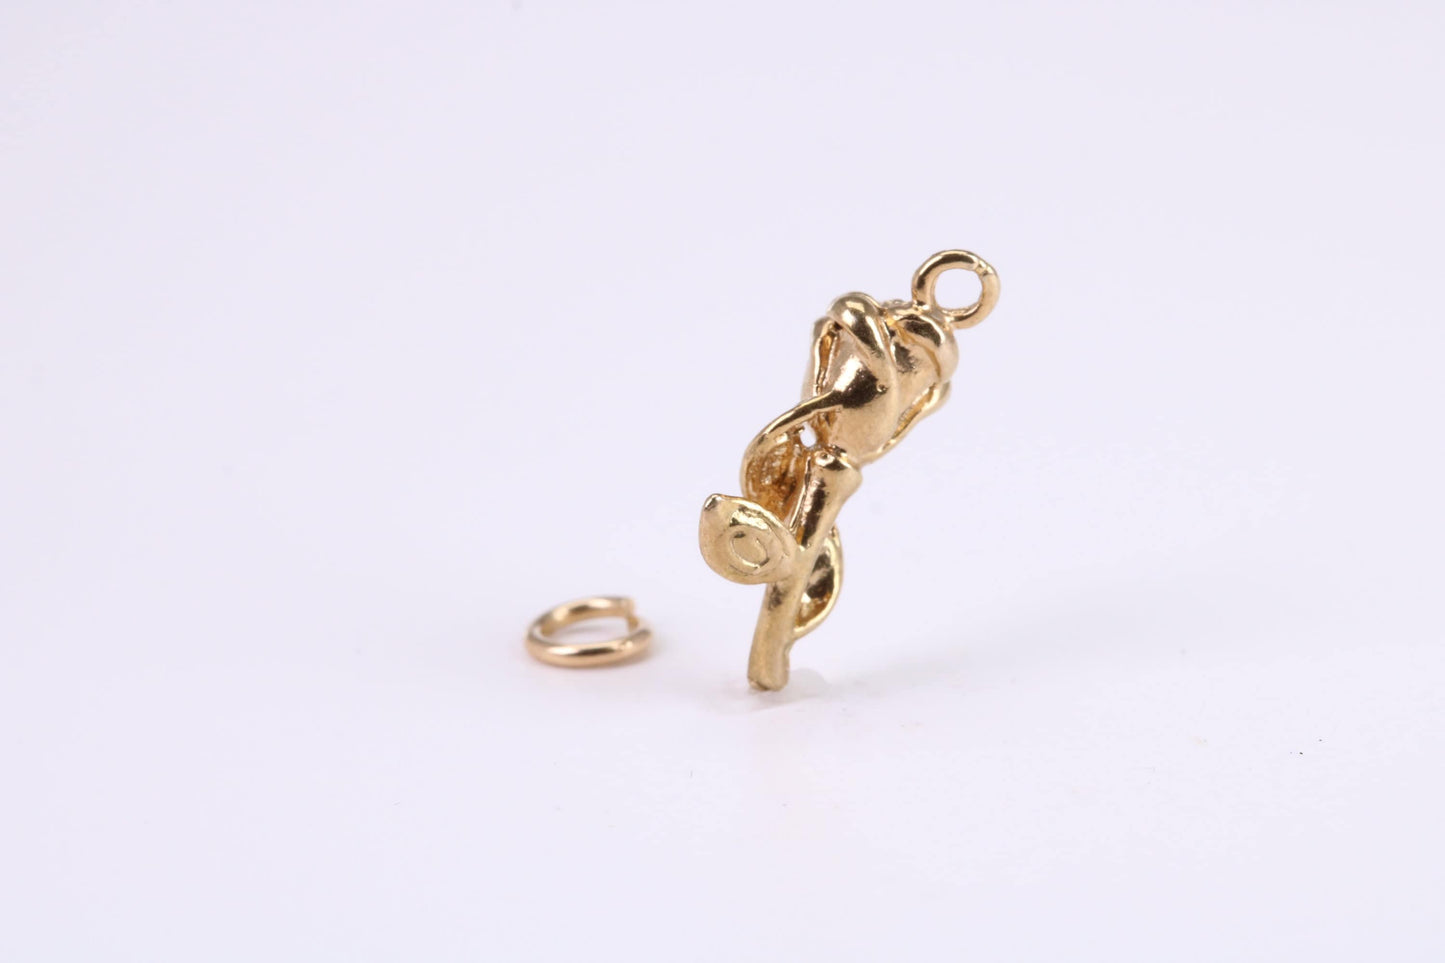 Mothers Day Rose Flower Charm, Traditional Charm, Made from Solid Yellow Gold, British Hallmarked, Complete with Attachment Link